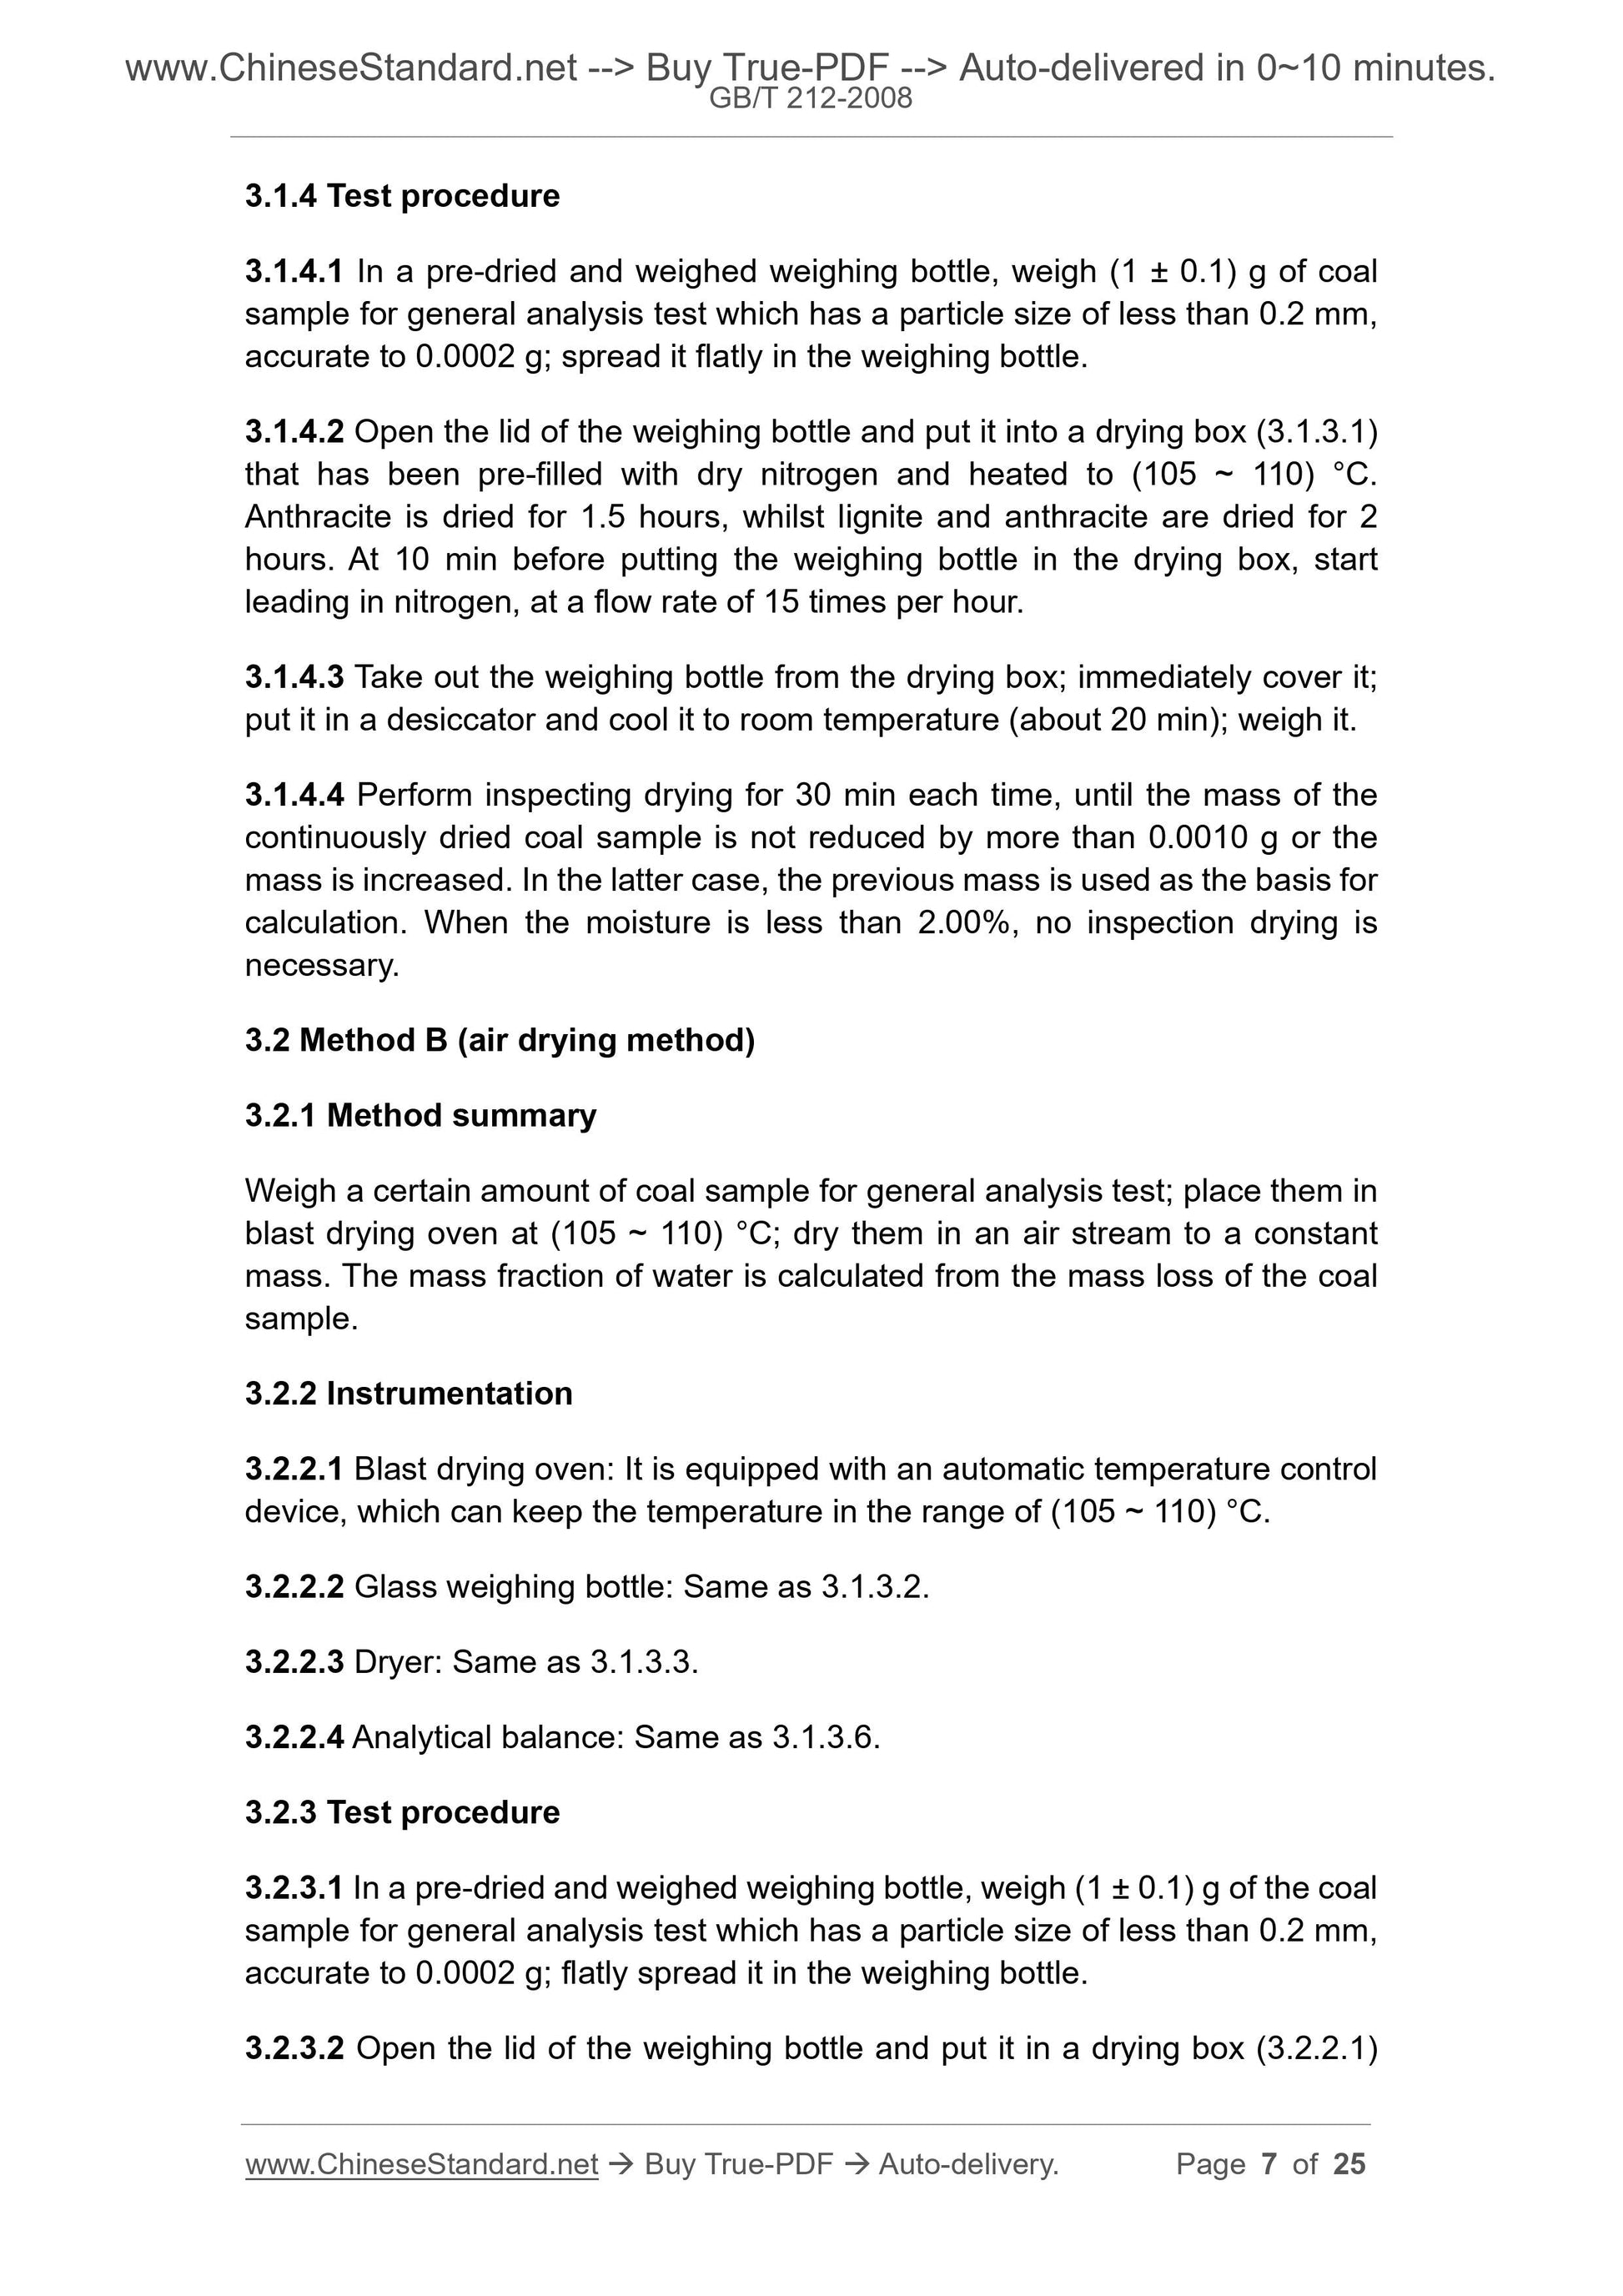 GB/T 212-2008 Page 4